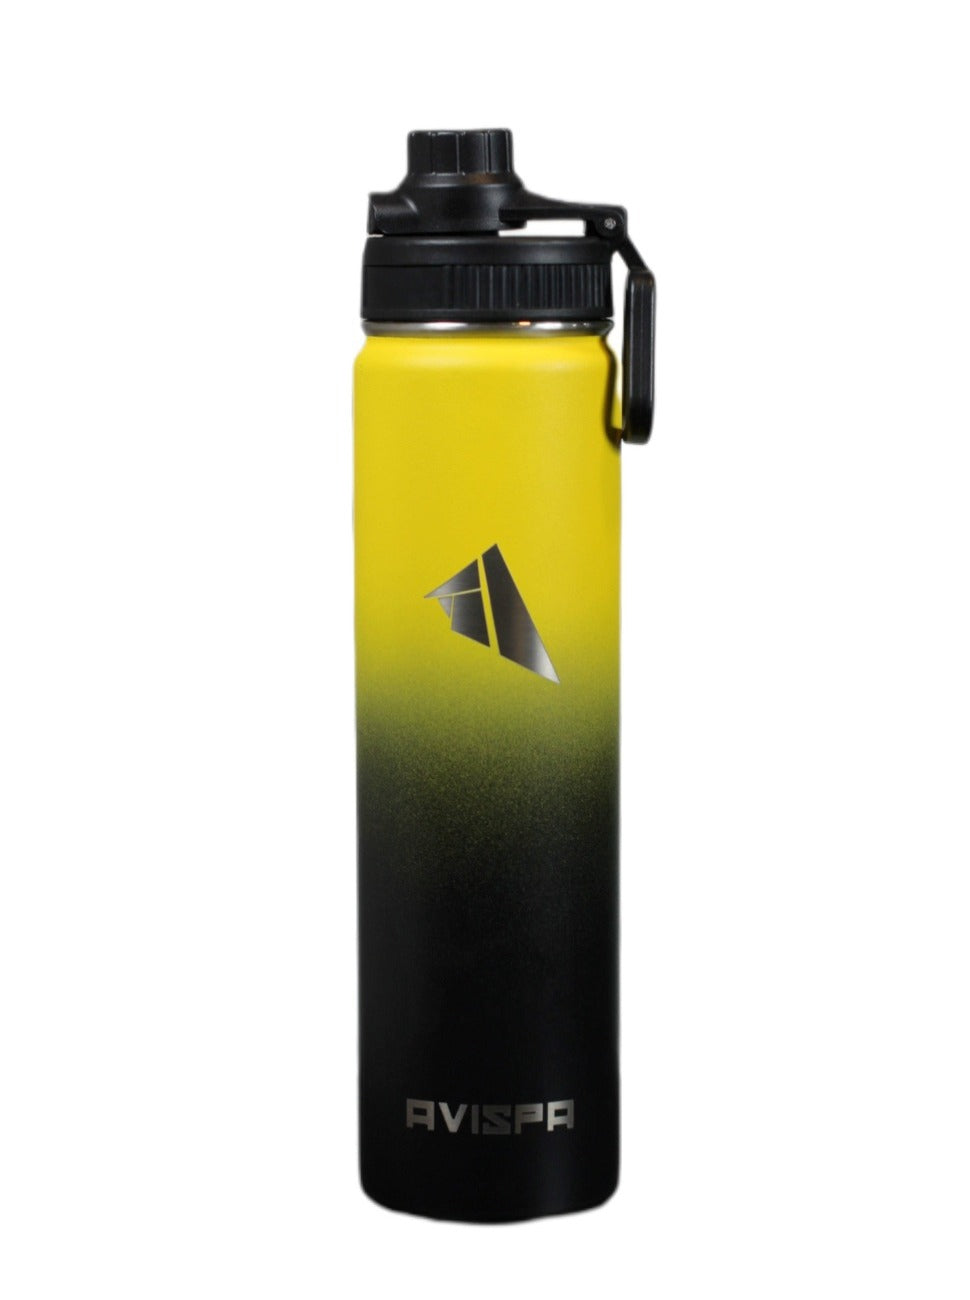 Double Wall Stainless Steel Insulated Water Bottle Leak Proof BPA